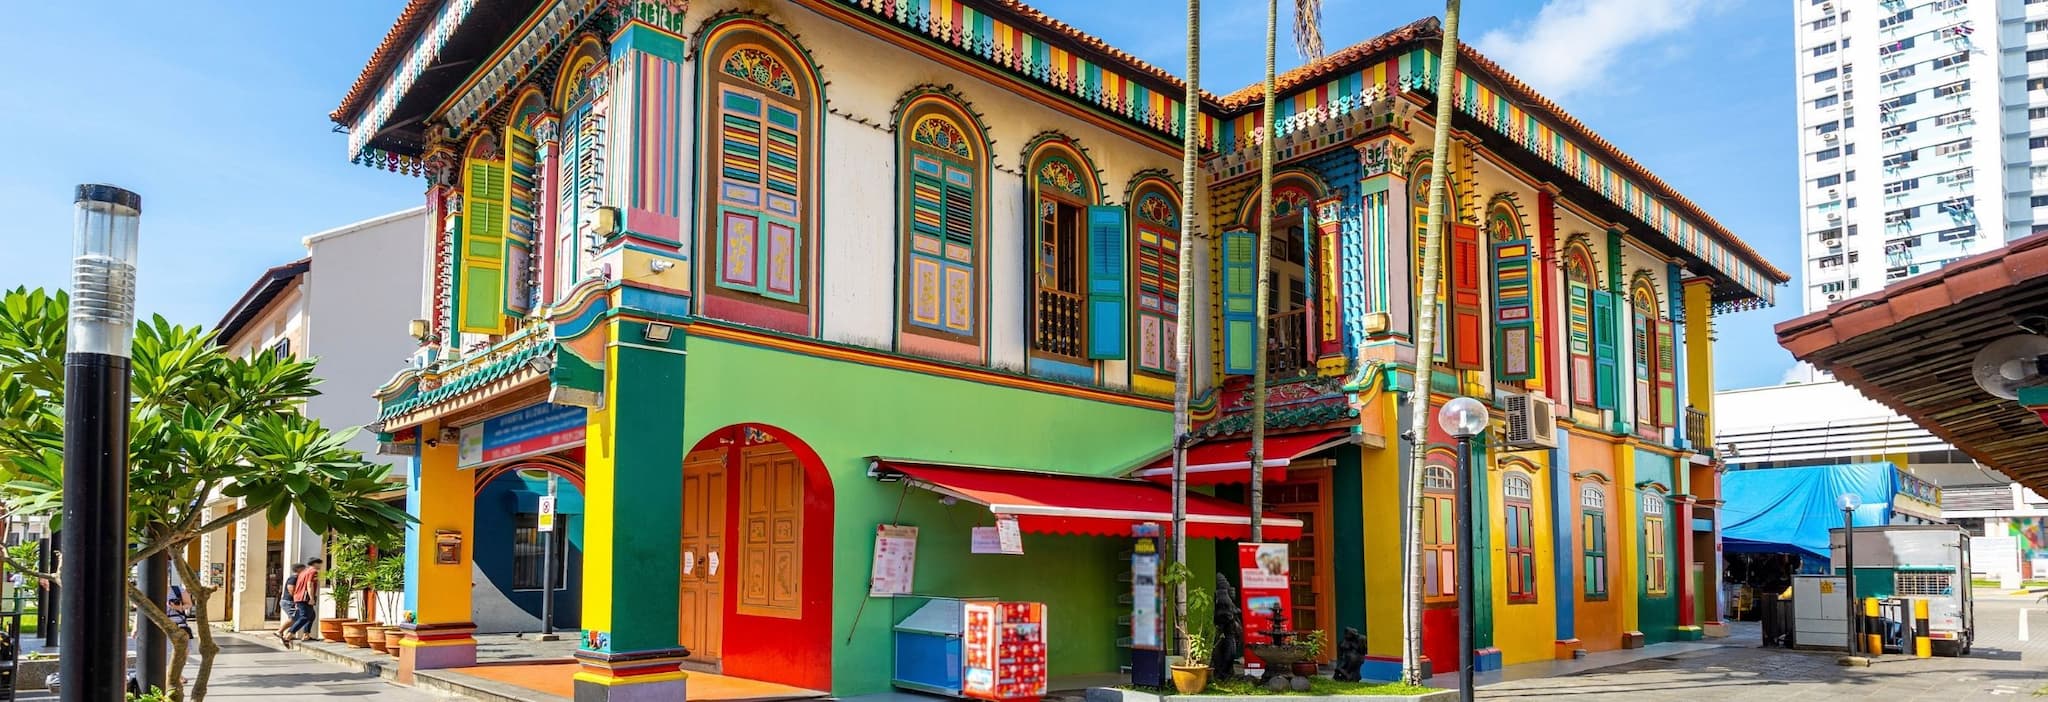 Top 5 things to do in Little India